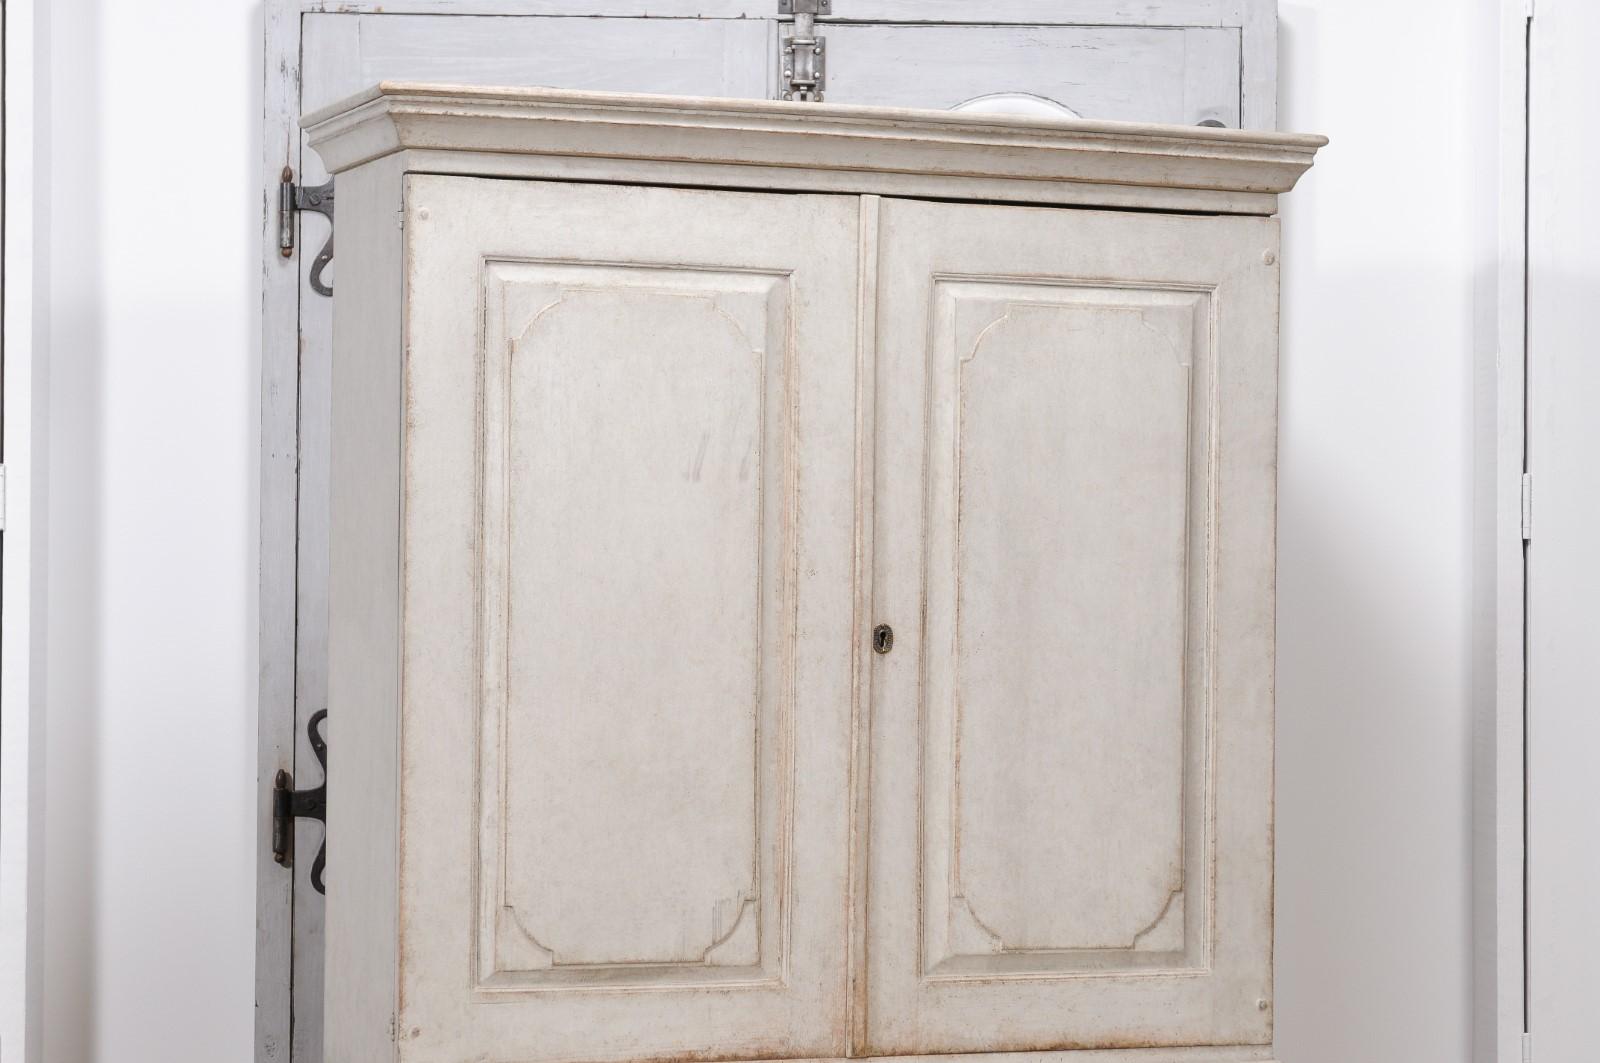 18th Century 1790s Swedish Gustavian Period Painted Buffet à Deux Corps with Carved Doors